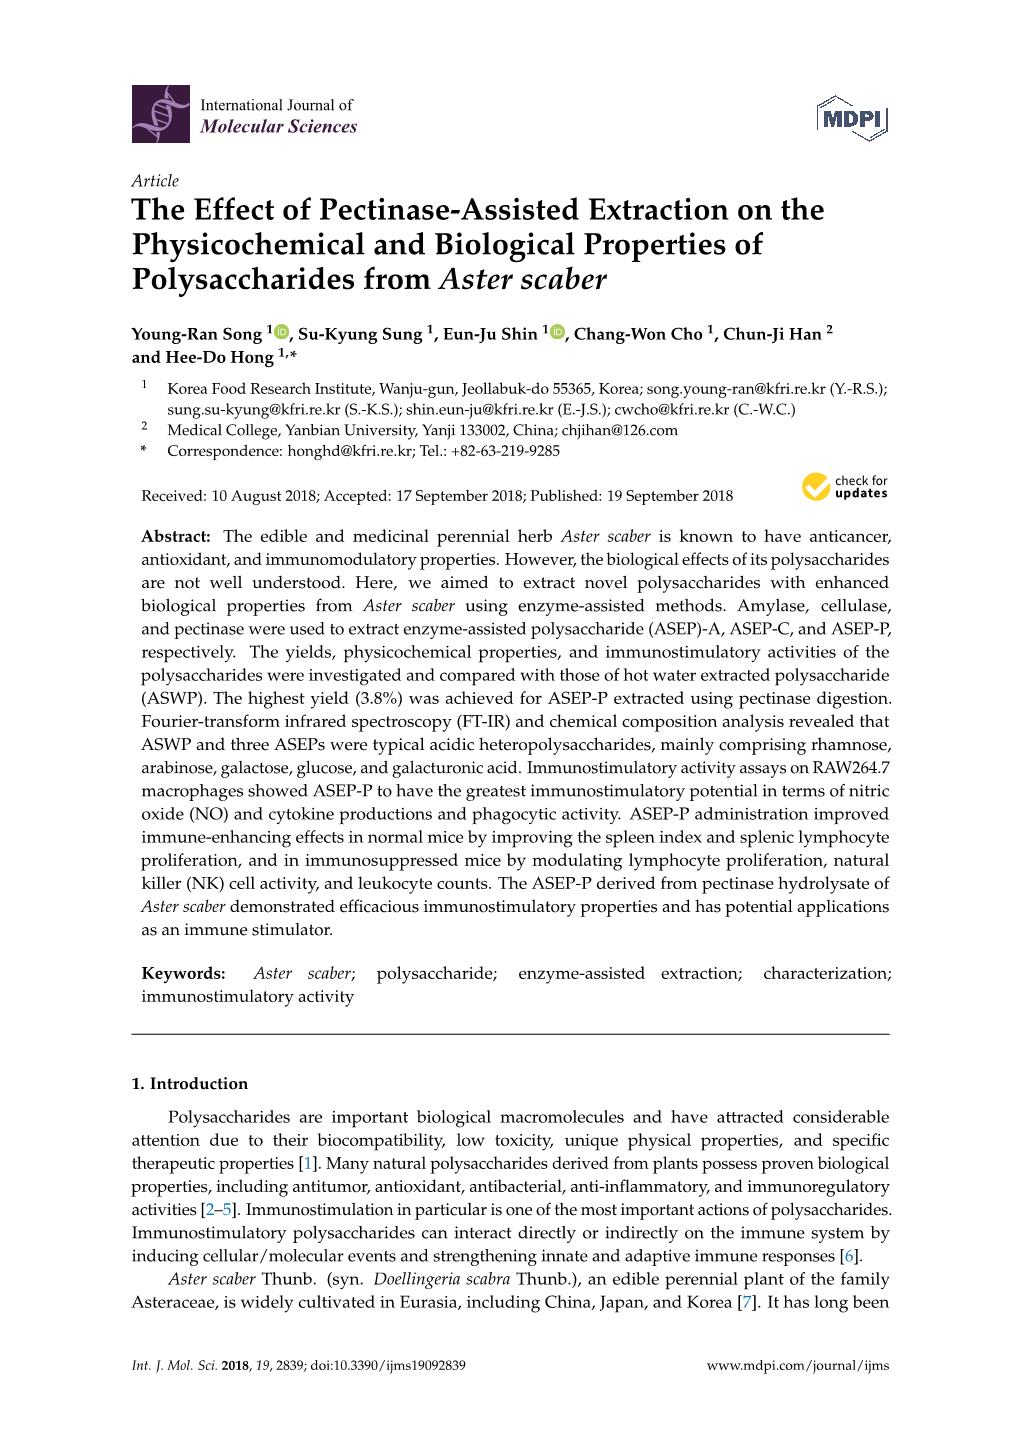 The Effect of Pectinase-Assisted Extraction on the Physicochemical and Biological Properties of Polysaccharides from Aster Scaber